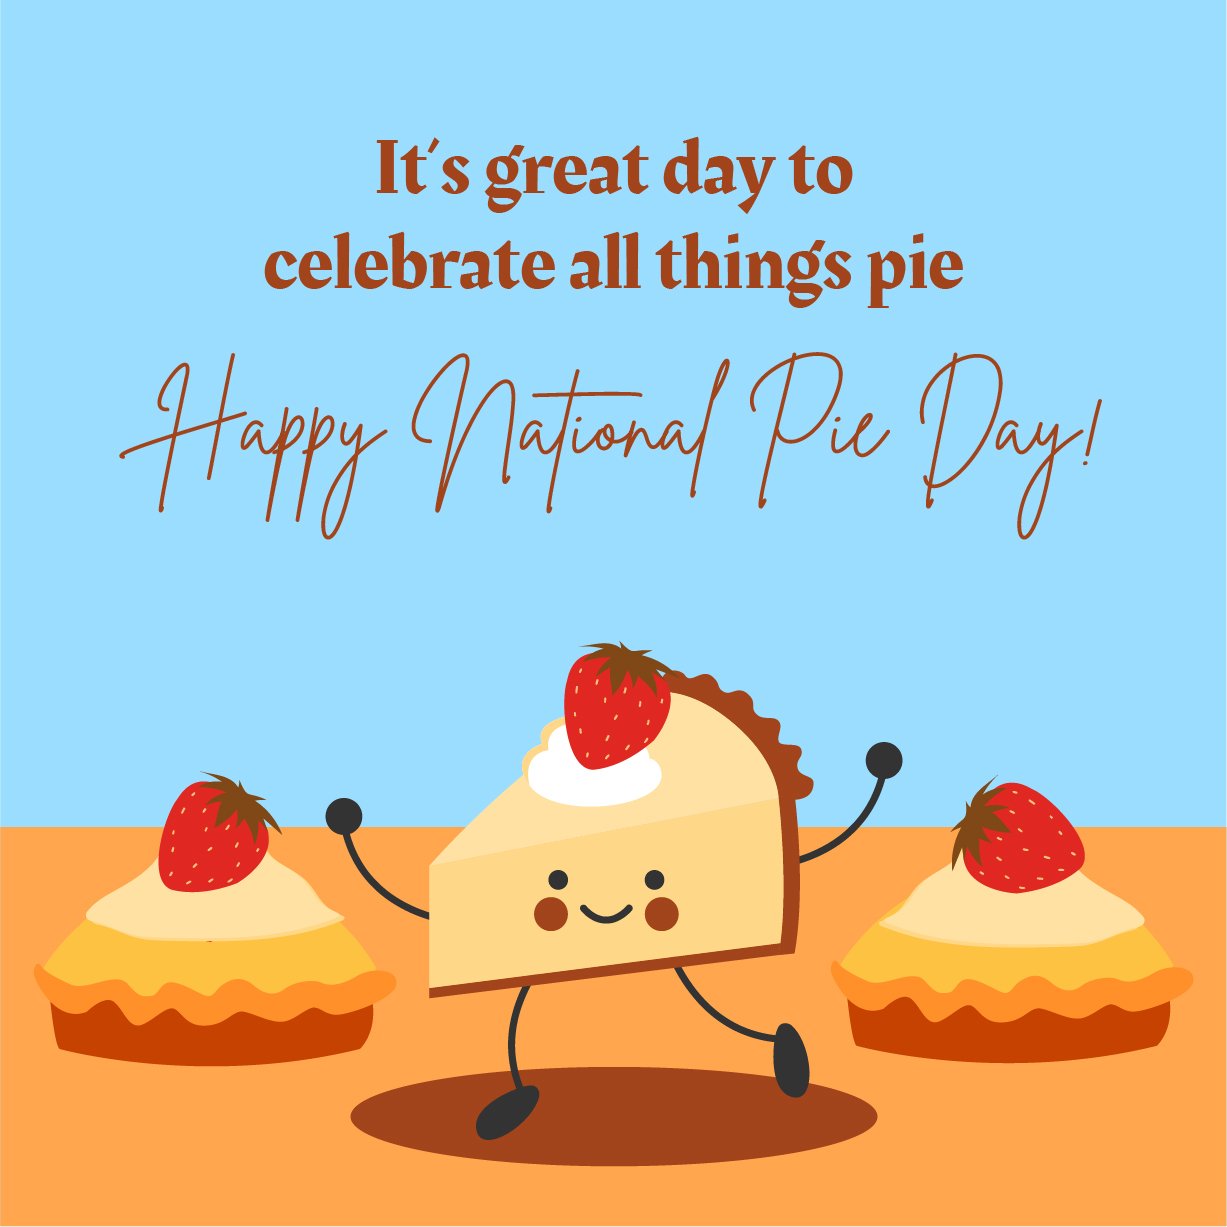 Free National Pie Day Poster Vector Download in Illustrator, PSD, EPS